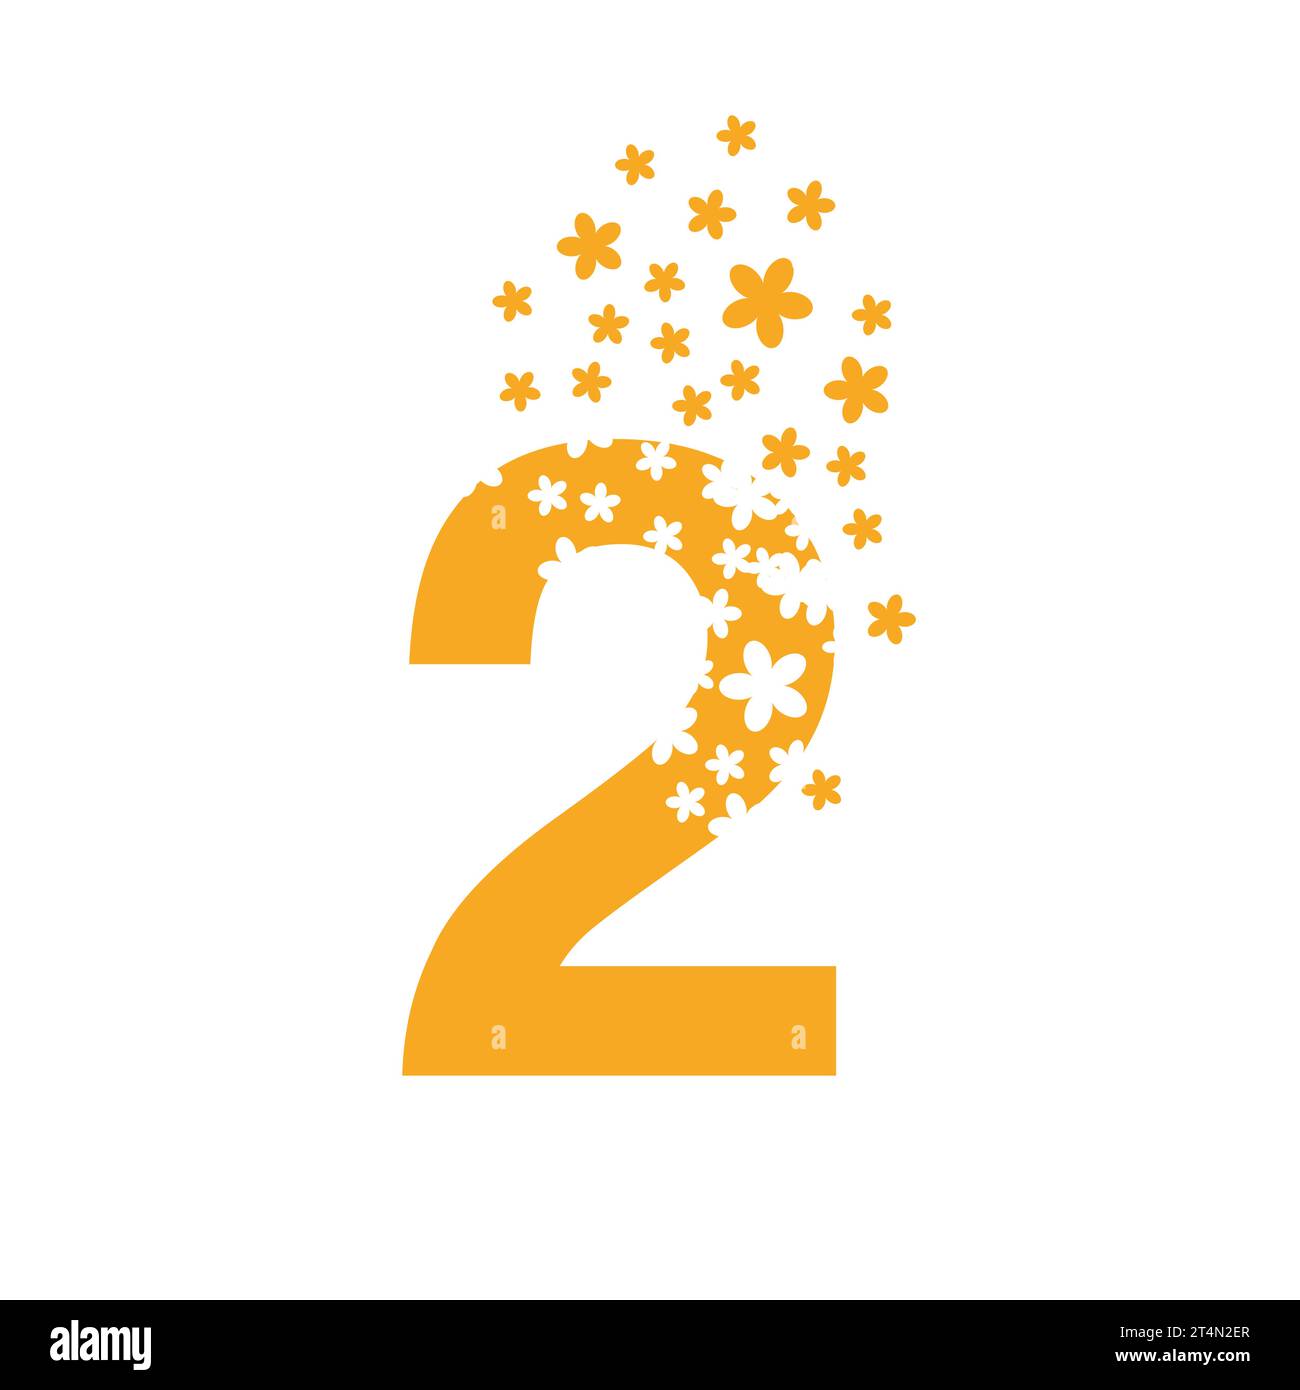 Number 2 dissolves into a cloud of flowers Vector Image Stock Vector